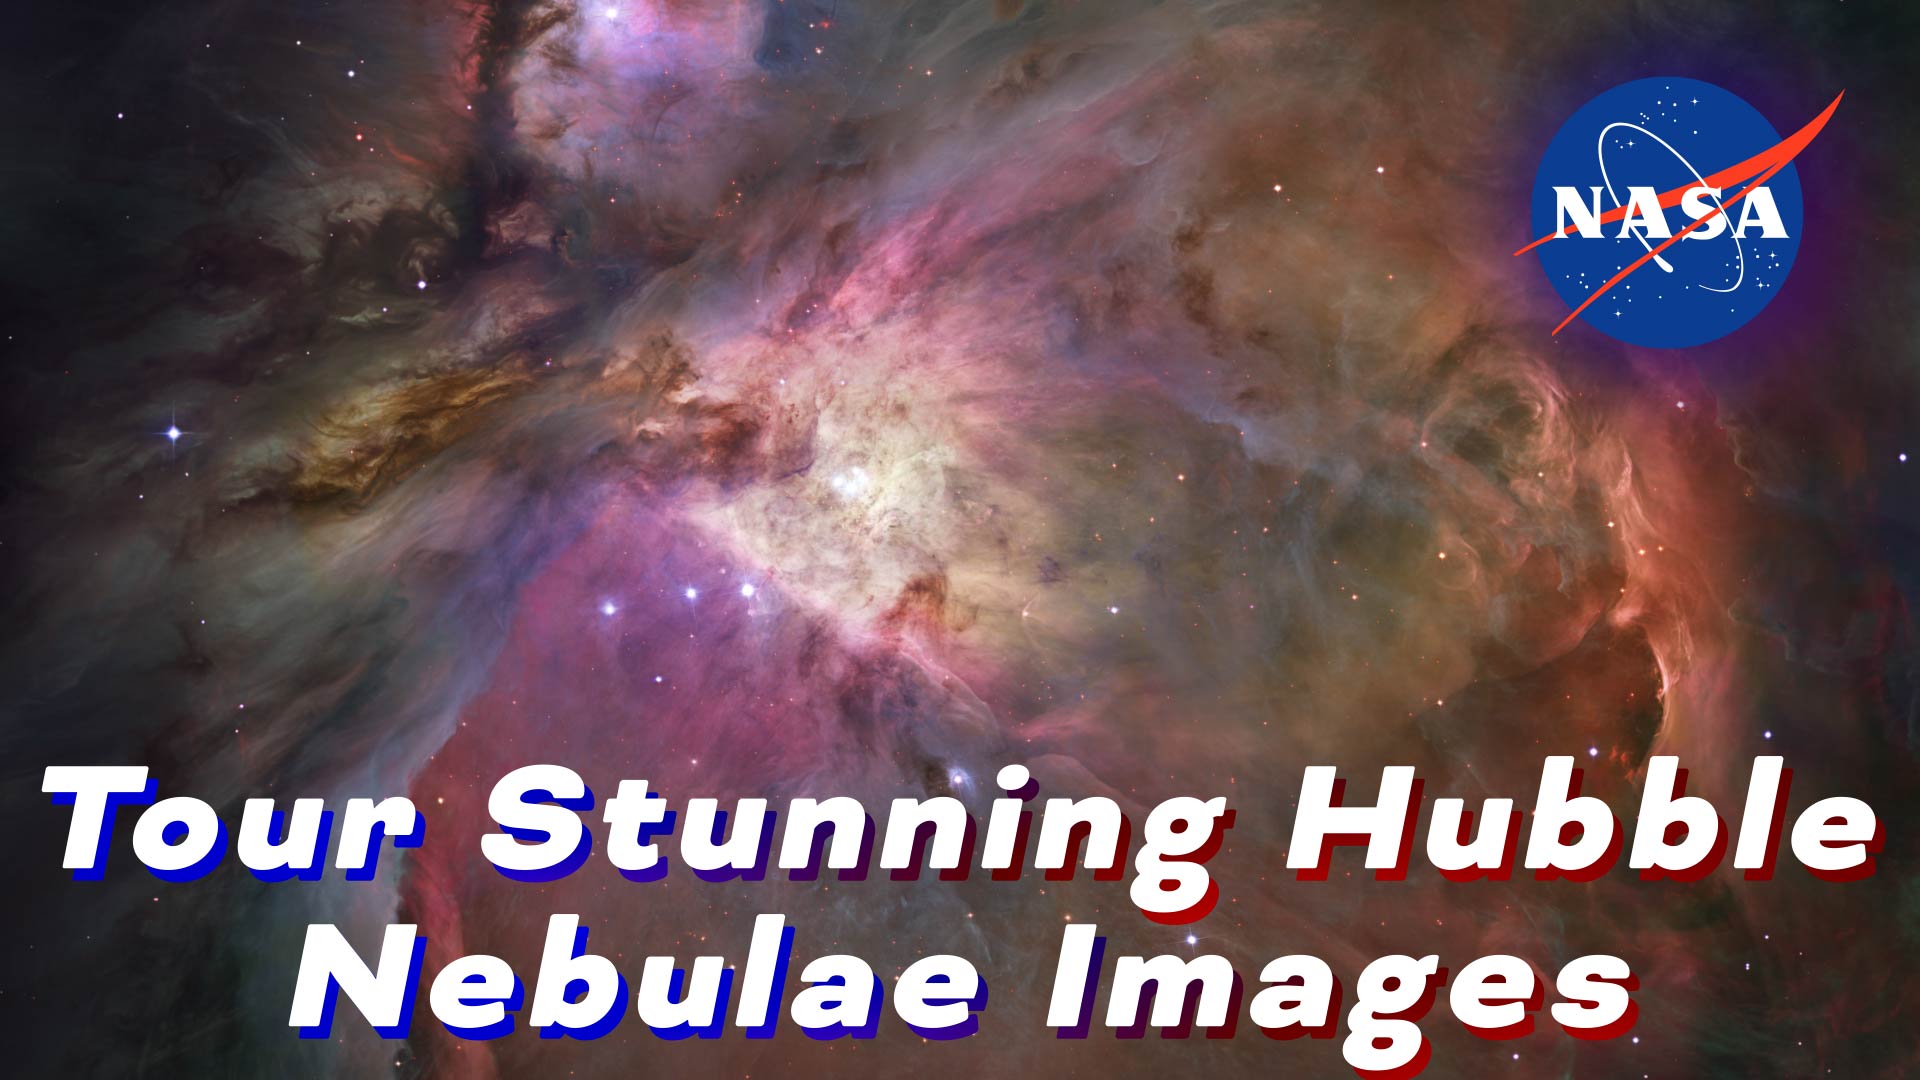 Preview Image for Tour Stunning Hubble Nebulae Images